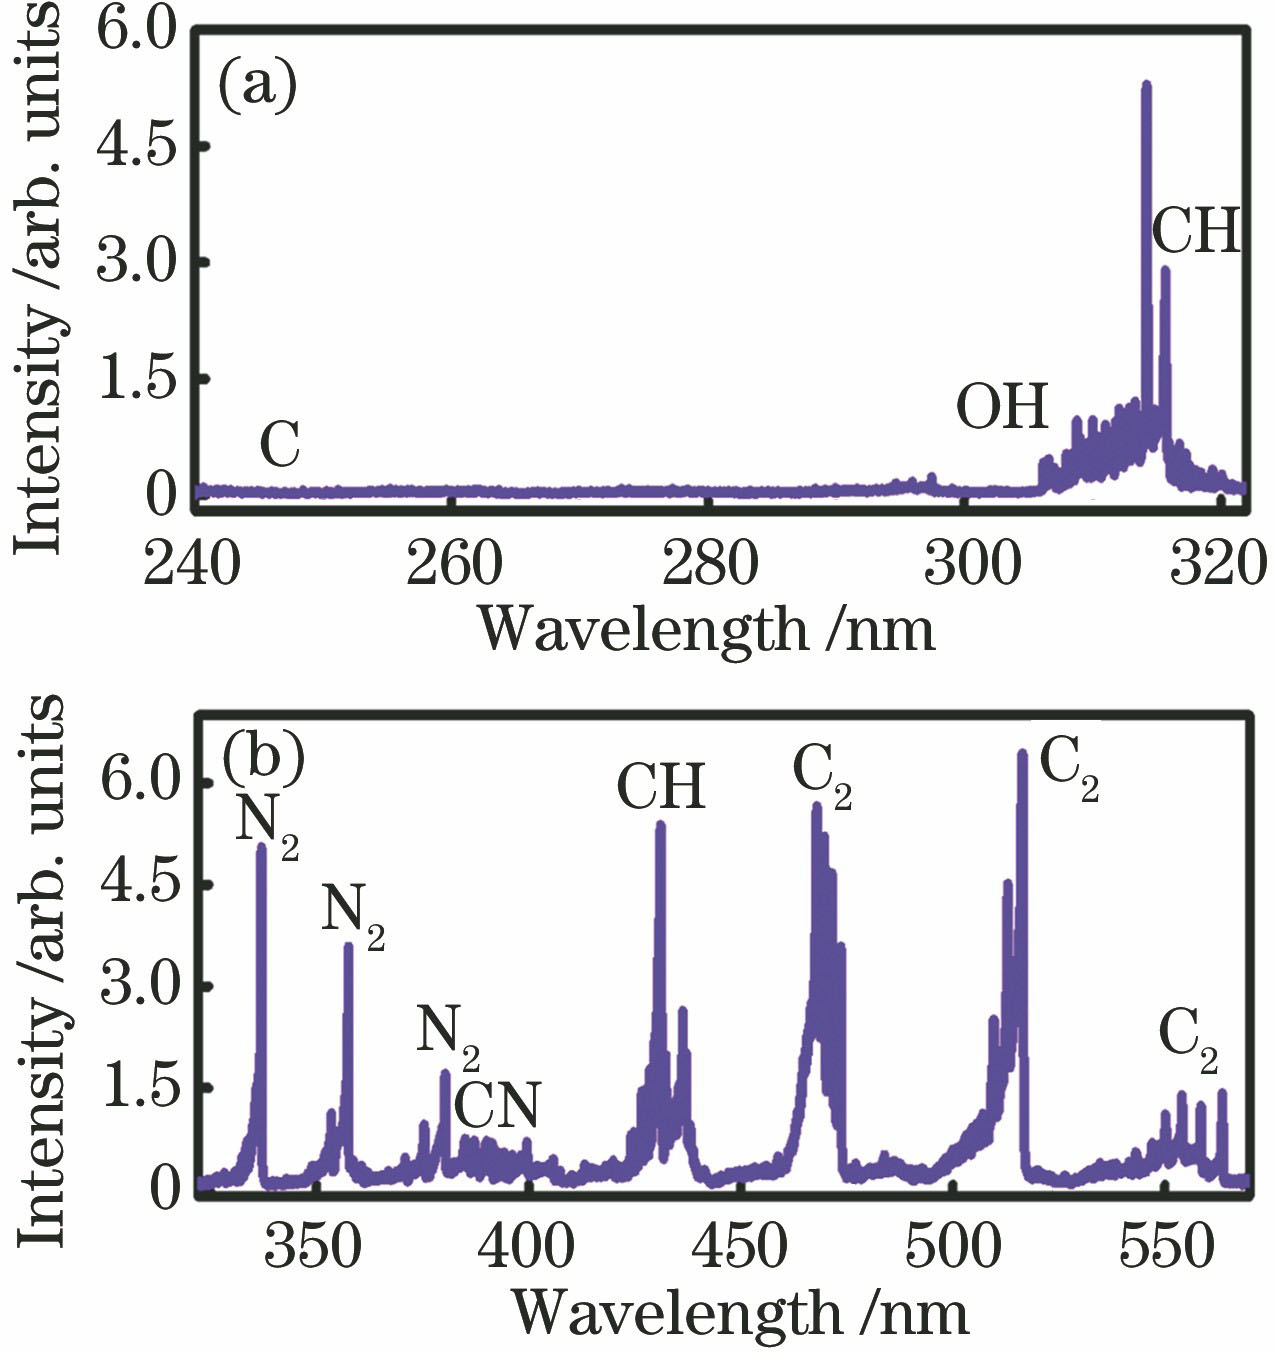 Filament-induced fluorescence spectra of ethanol flame. (a) 240-322 nm;(b) 322-570 nm